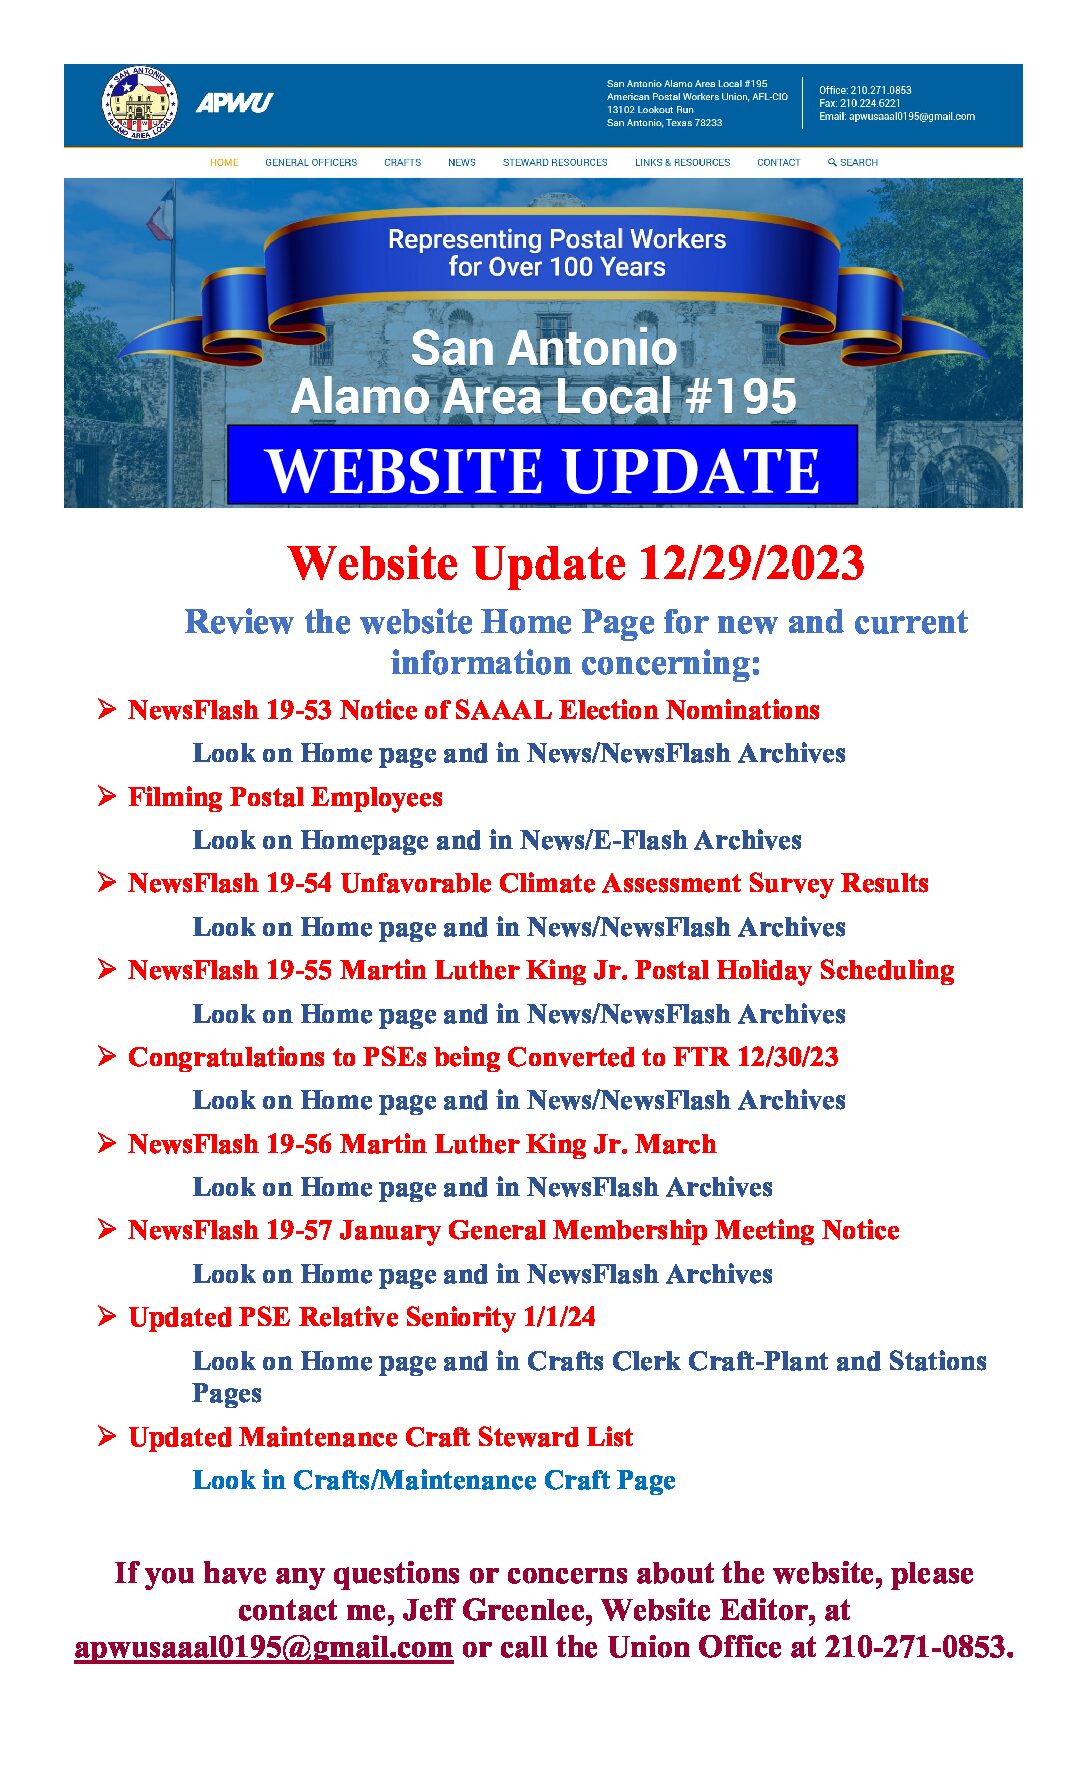 Website Update Quick Reference 12/29/23 - 